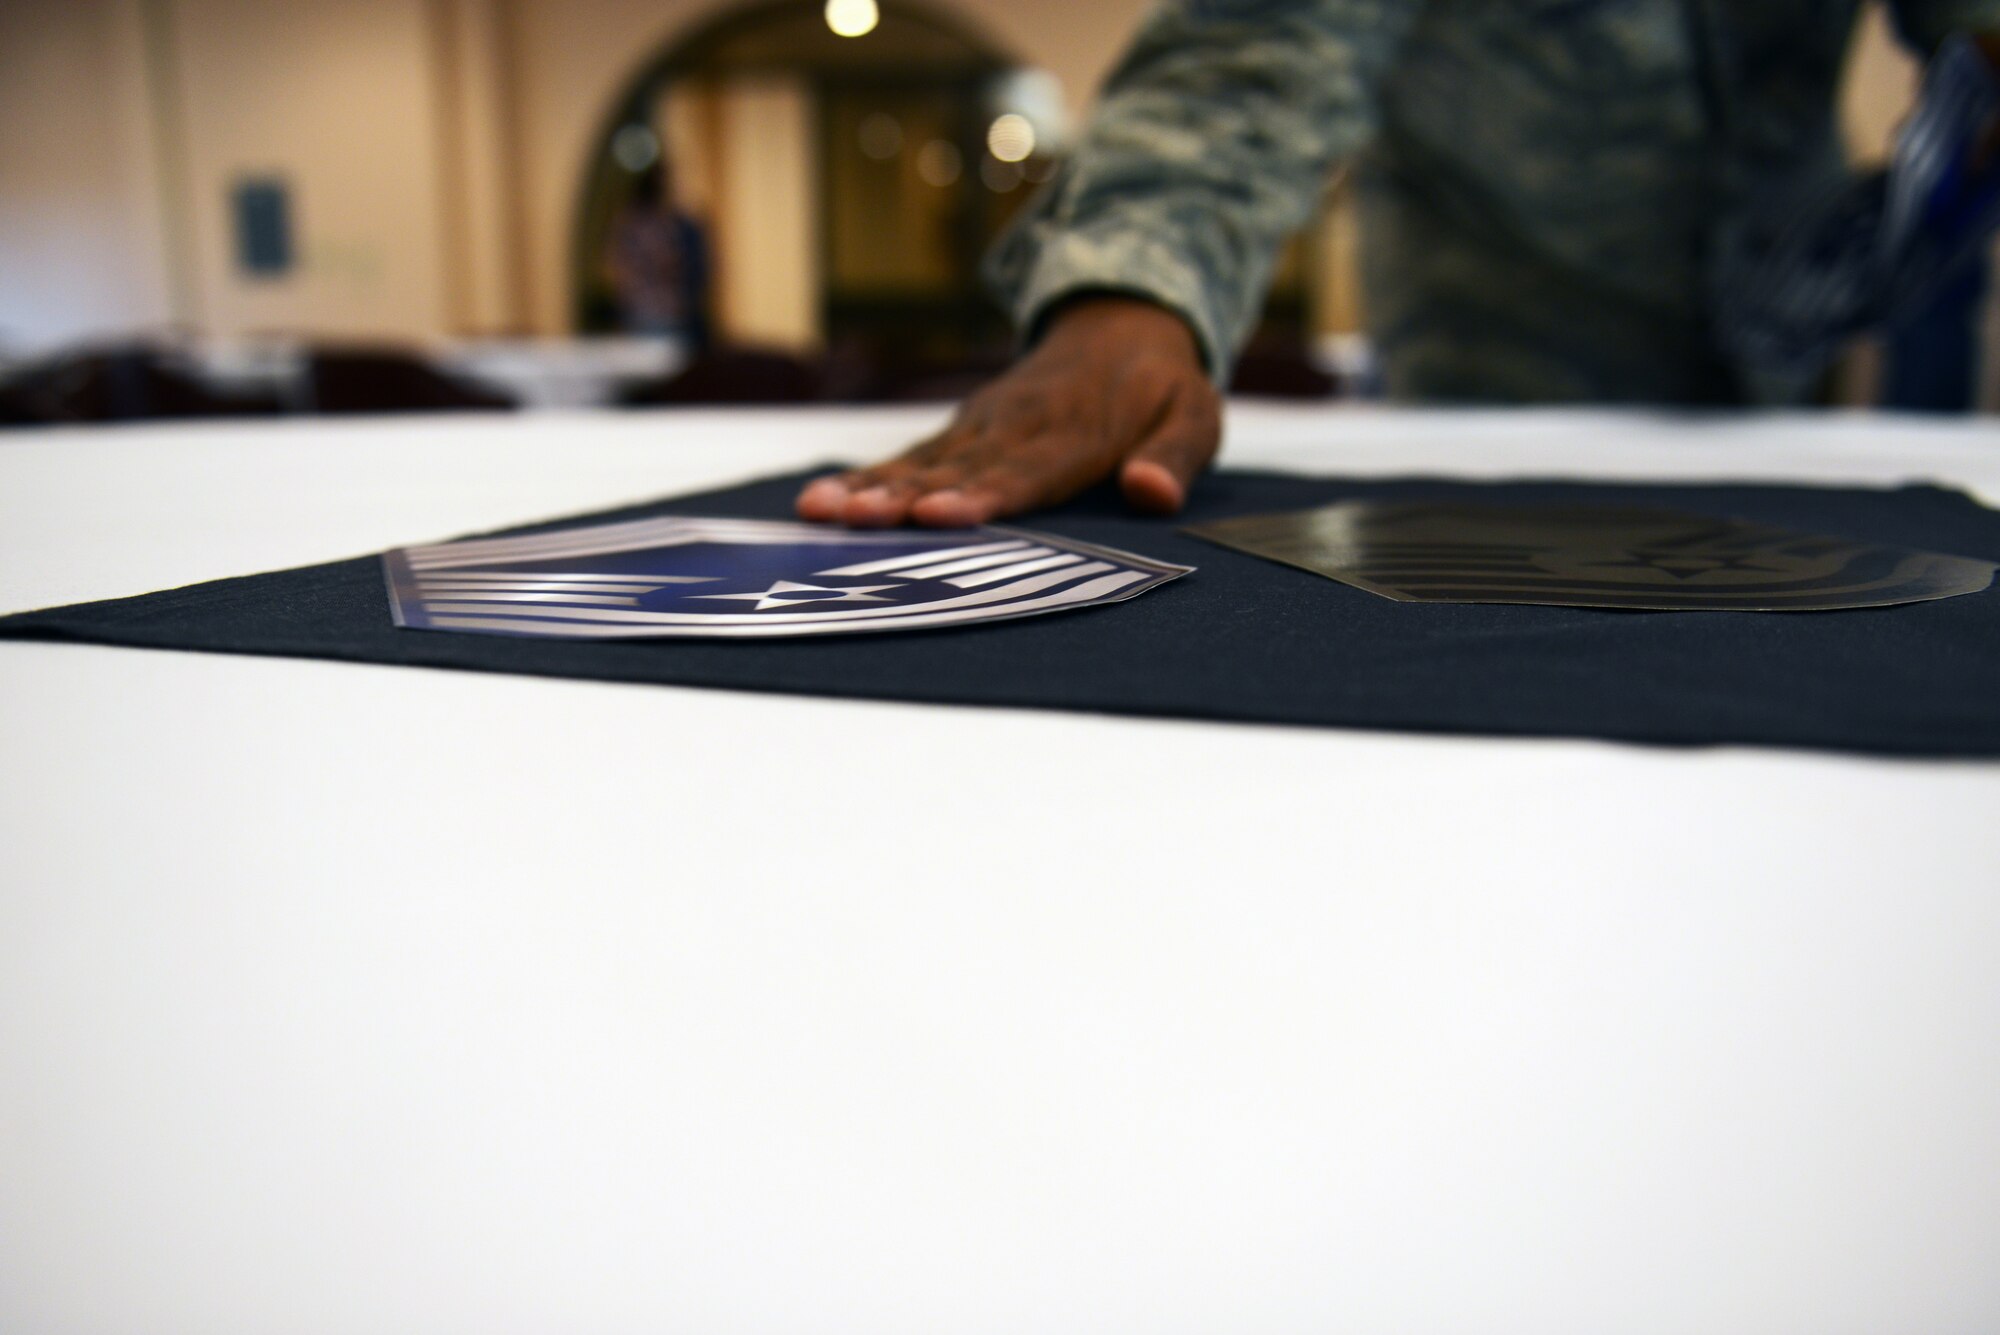 U.S. Chief Master Sgt. Derrick Harper, 7th Force Support Squadron superintendent, places a rank insignia on a table before the Dyess chief master sergeant promotion party Nov. 21, 2014, at Dyess Air Force Base, Texas. Six Dyess senior non-commissioned officers were selected to receive the highest enlisted rank. (U.S. Air Force photo by Airman 1st Class Kedesha Pennant/Released